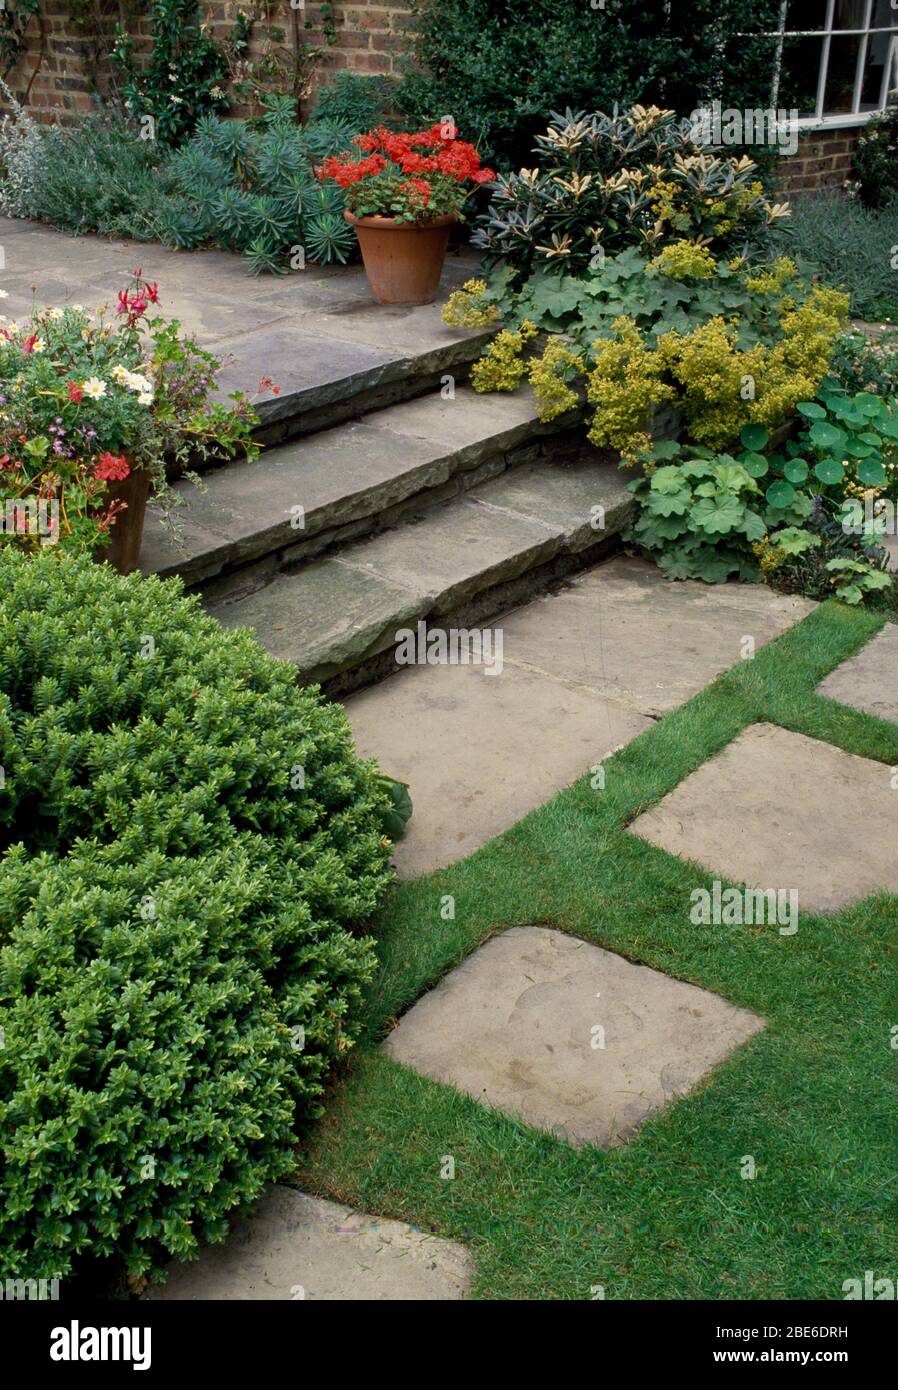 Clipped hebe and alchemilla 'Mollis' on either side of stone steps beside paving slabs in newly mown lawn Stock Photo